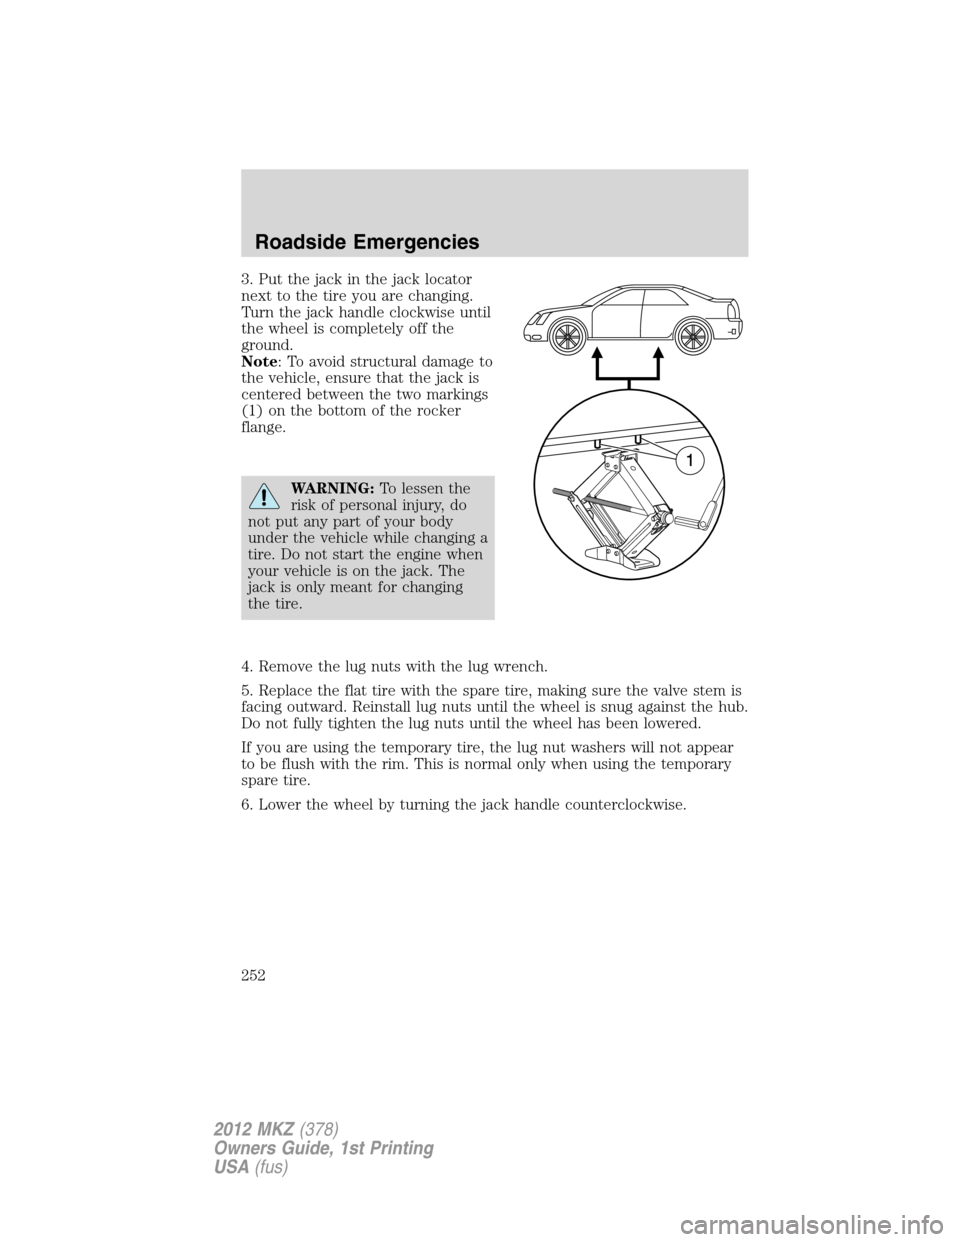 LINCOLN MKZ 2012 Owners Manual 3. Put the jack in the jack locator
next to the tire you are changing.
Turn the jack handle clockwise until
the wheel is completely off the
ground.
Note: To avoid structural damage to
the vehicle, ens